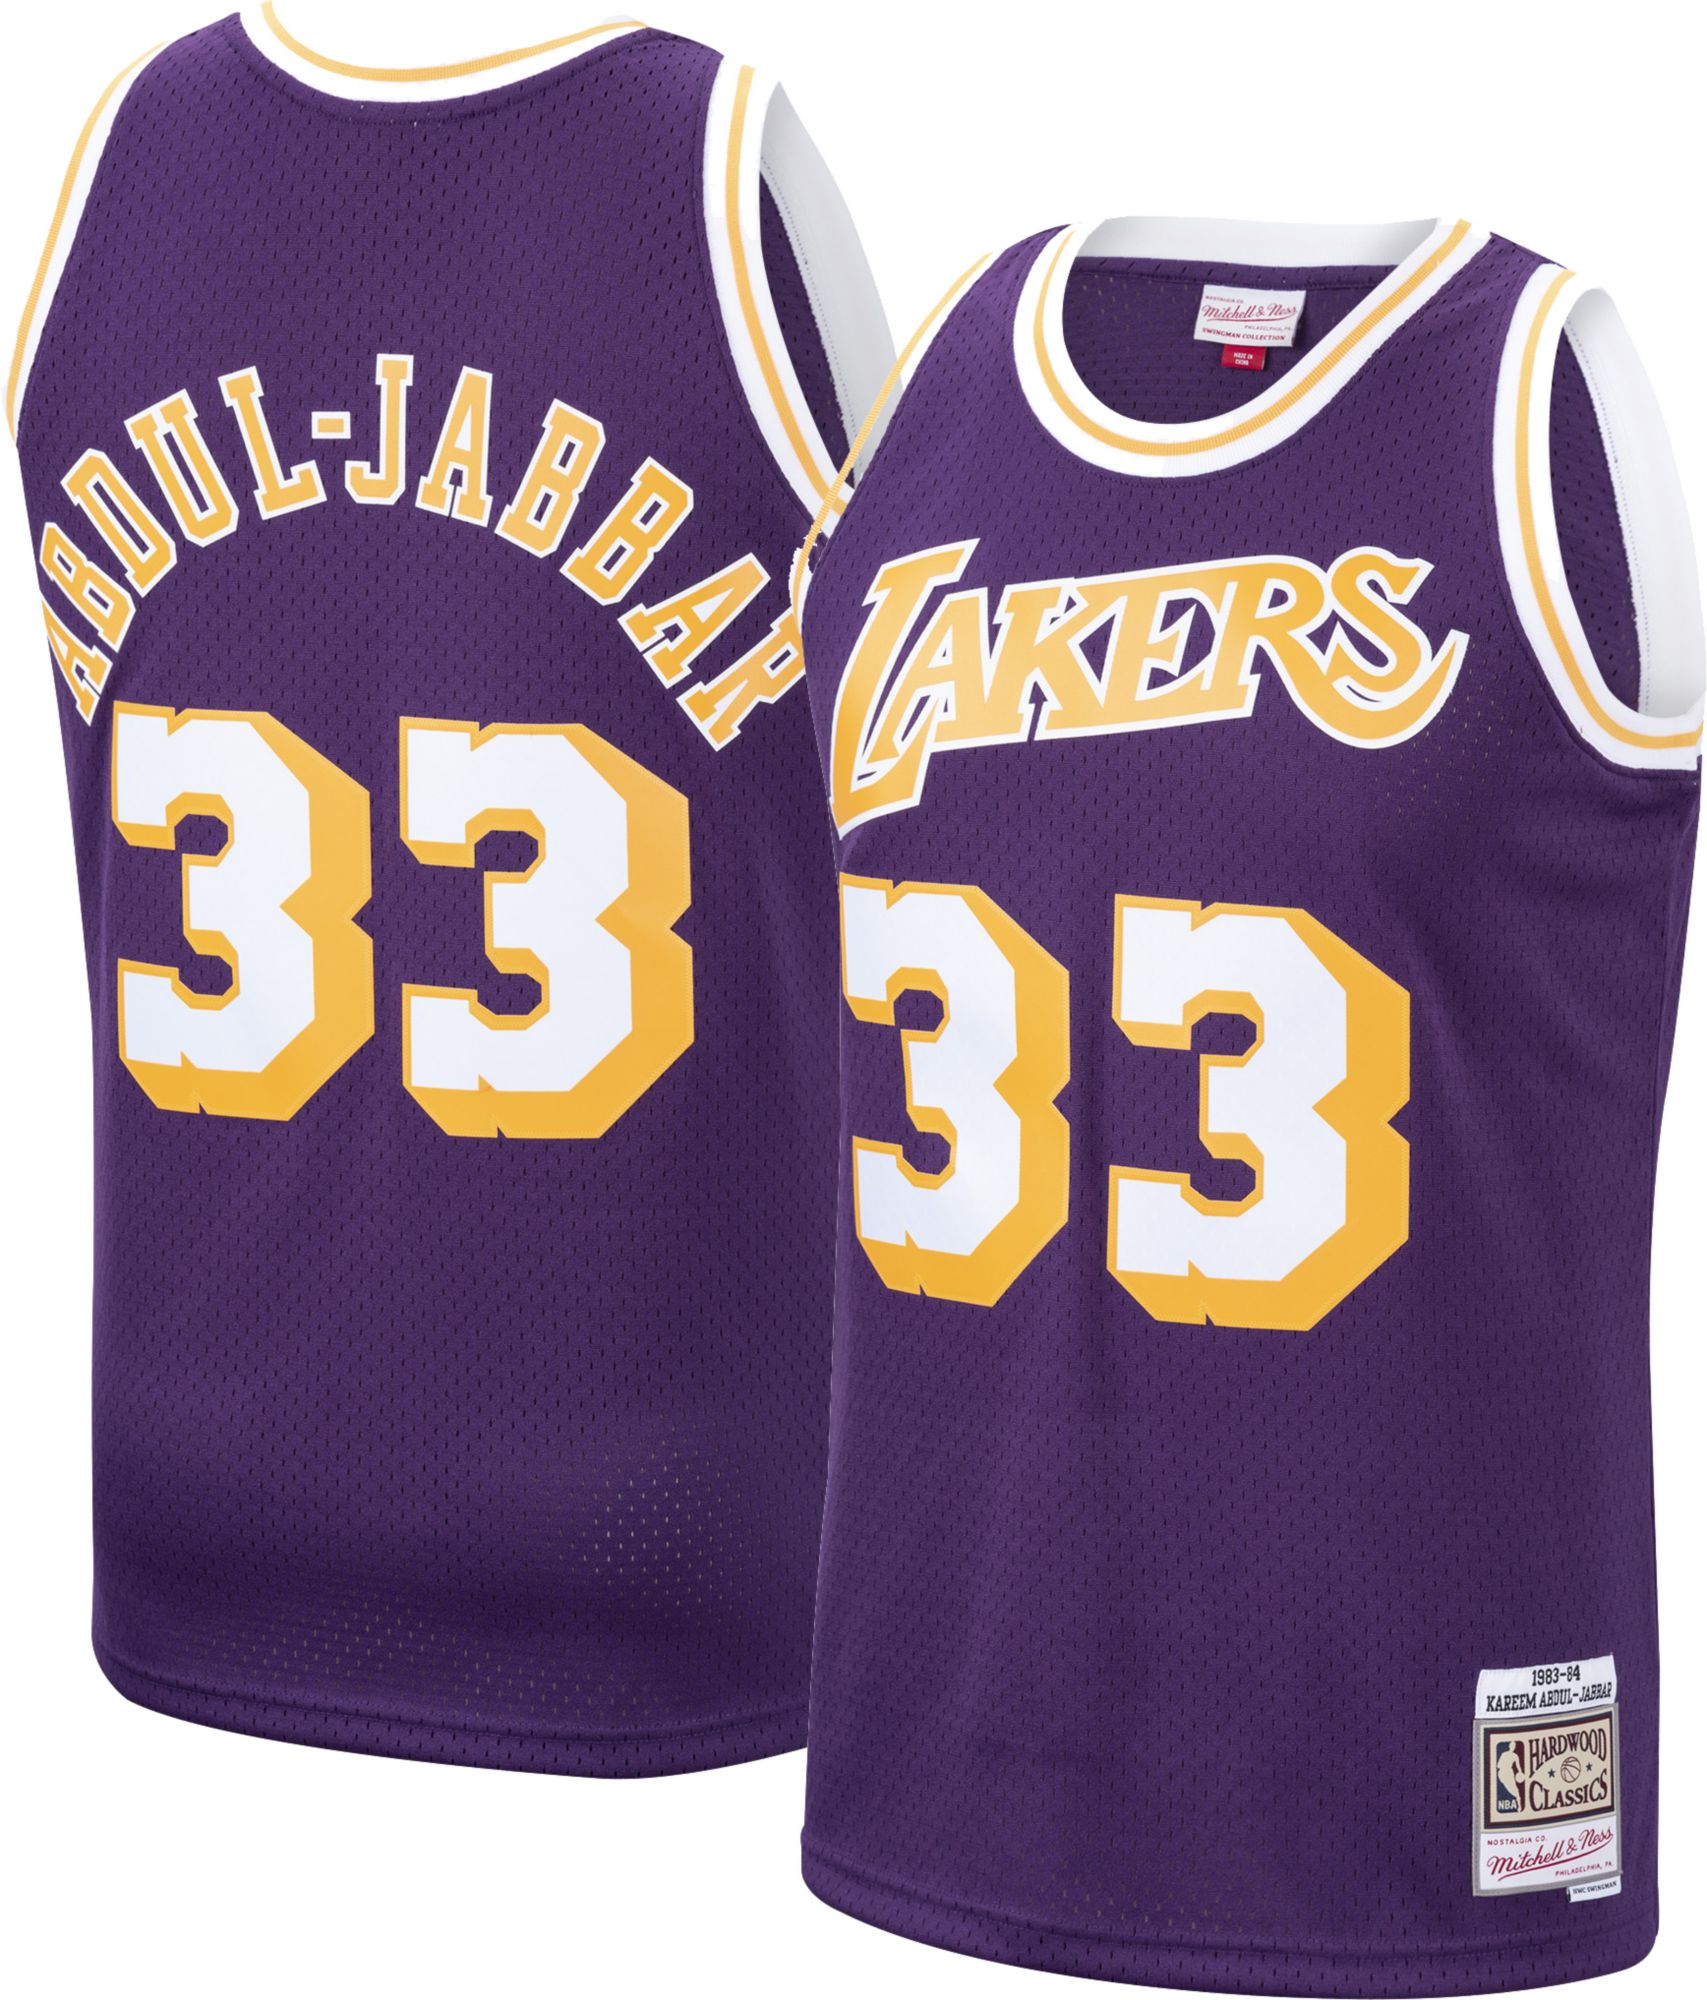 lakers city edition jersey 2021